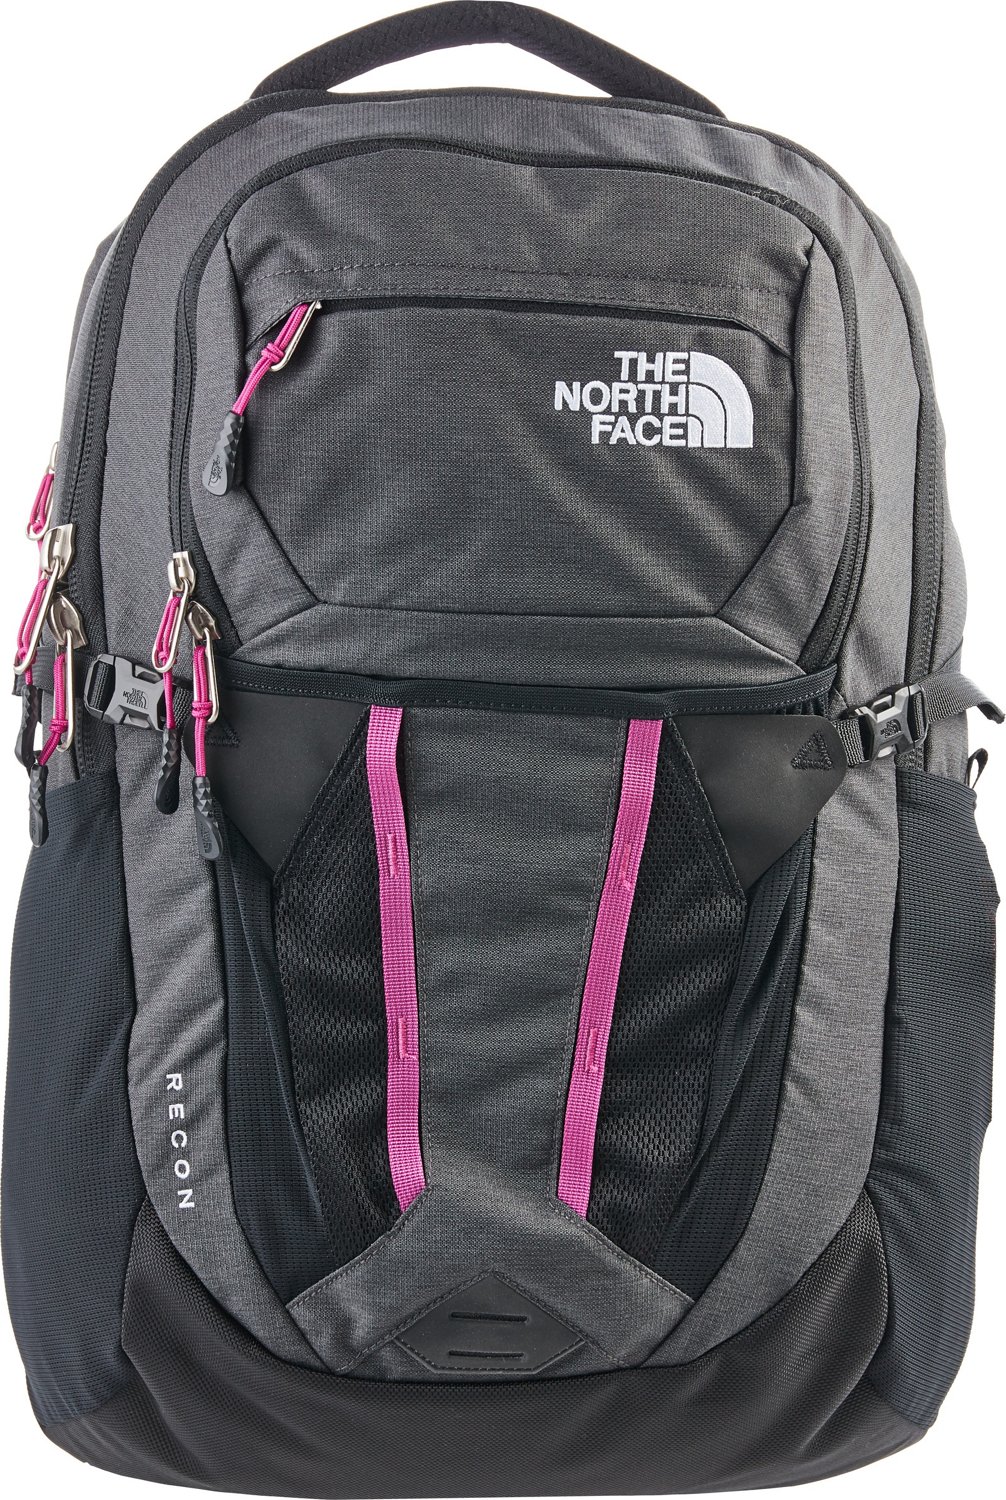 The North Face Women's Recon Backpack | Academy